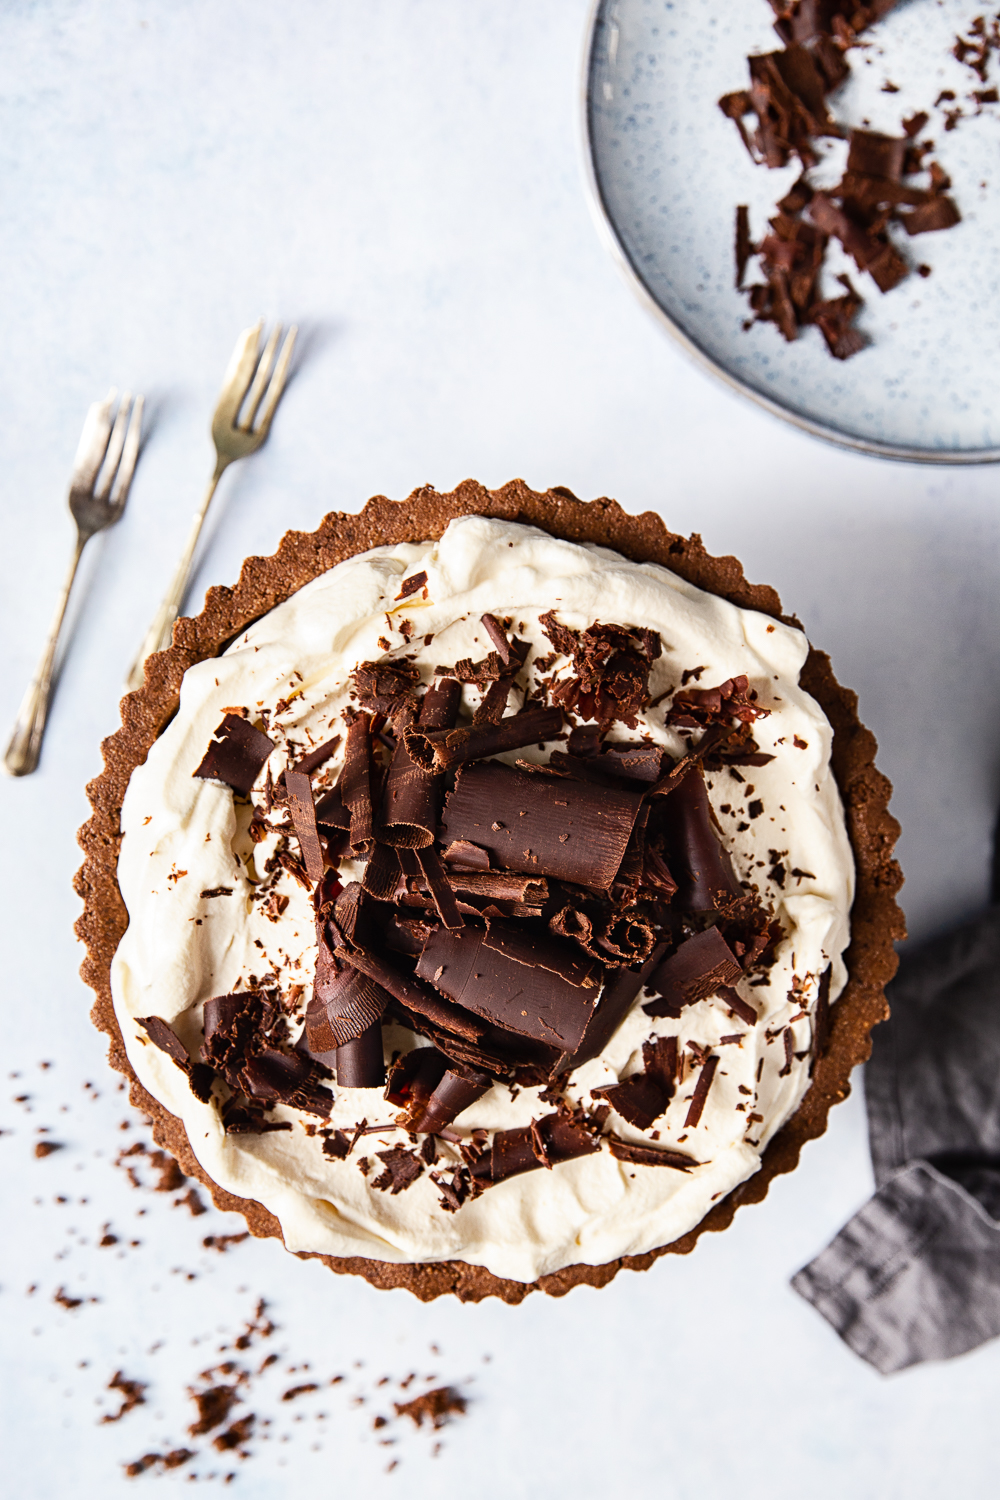 Banoffee Pie view from above